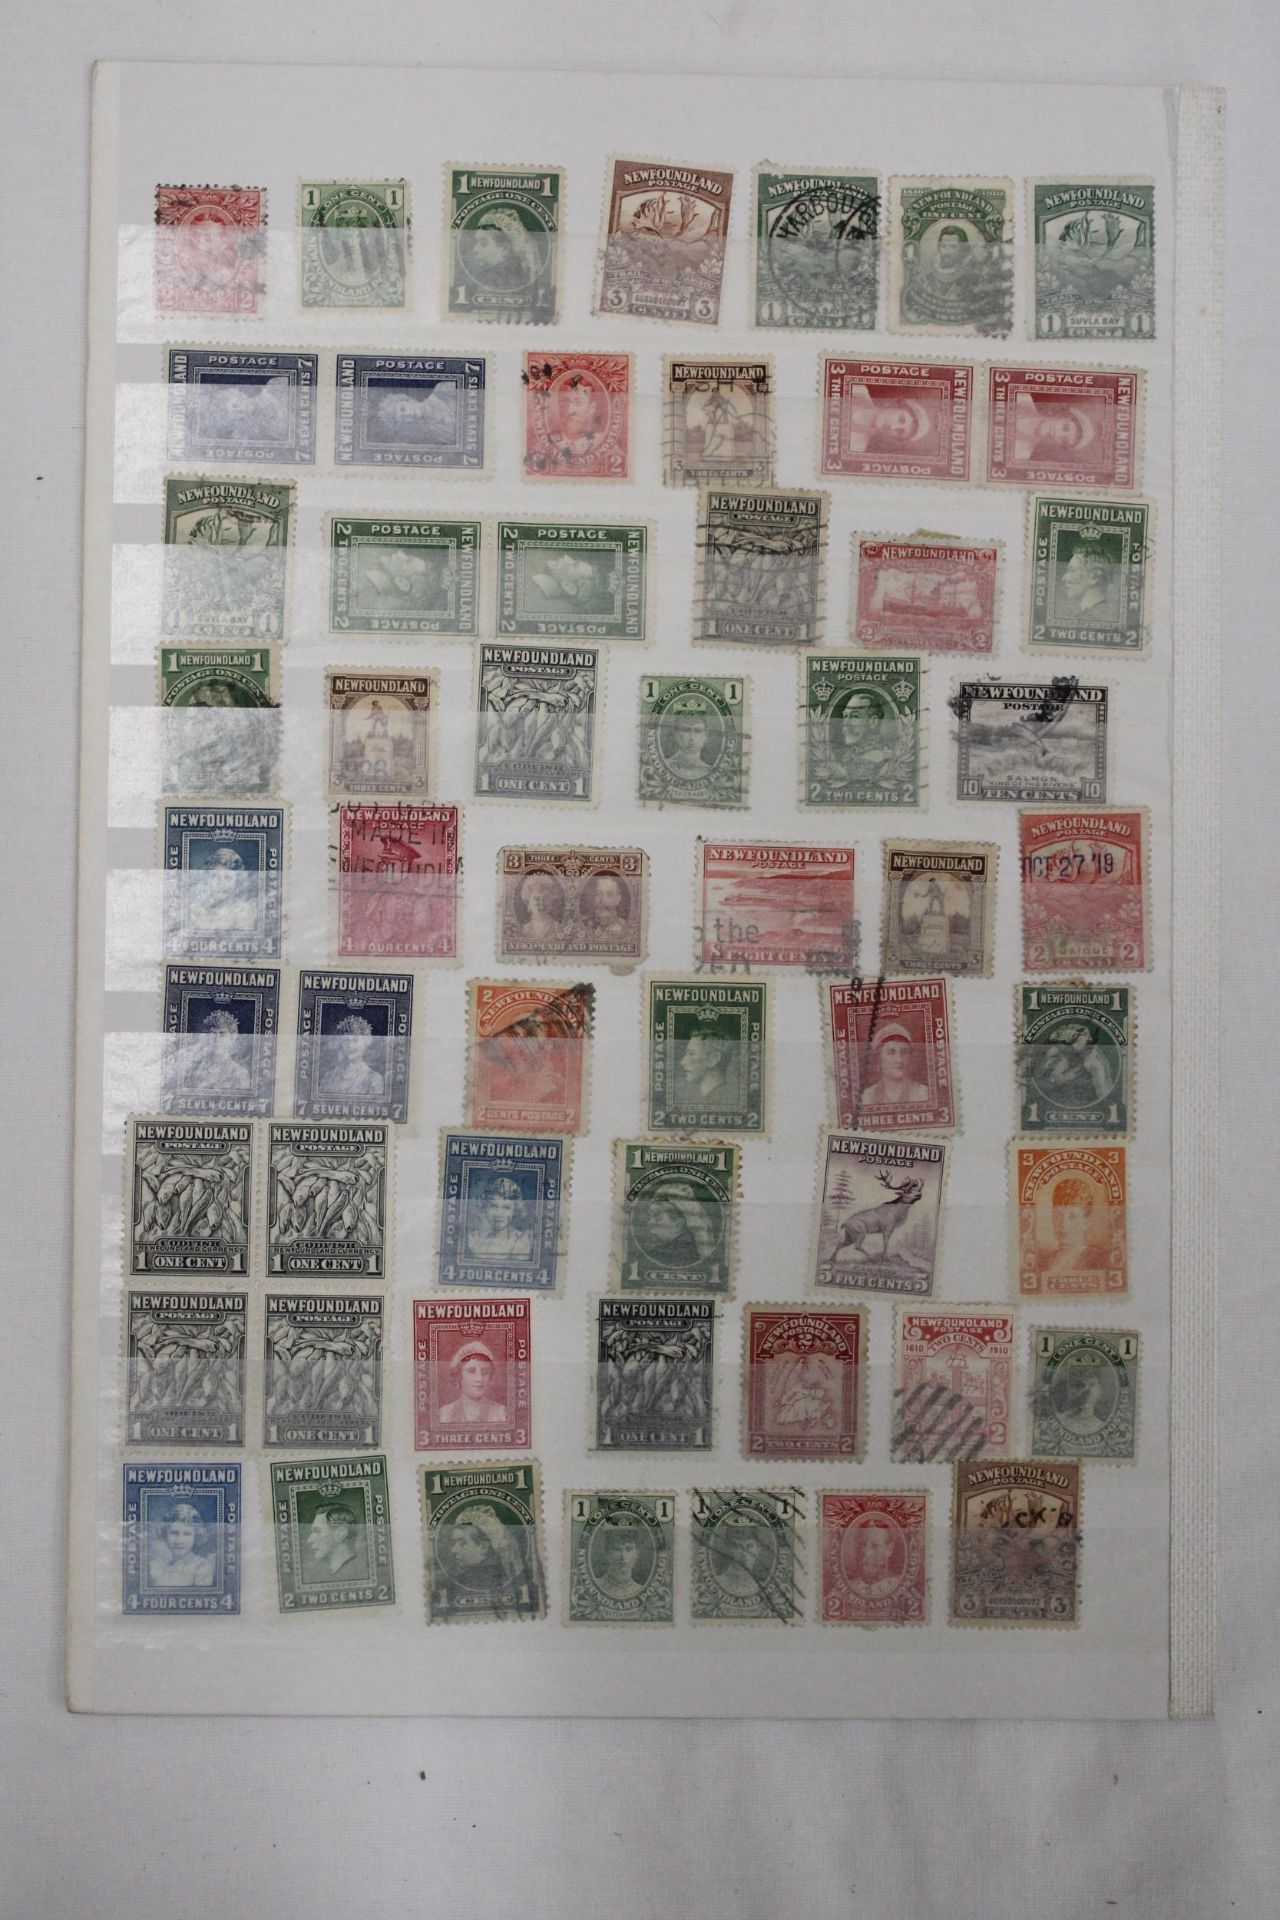 TWO PAGES OF NEWFOUNDLAND STAMPS